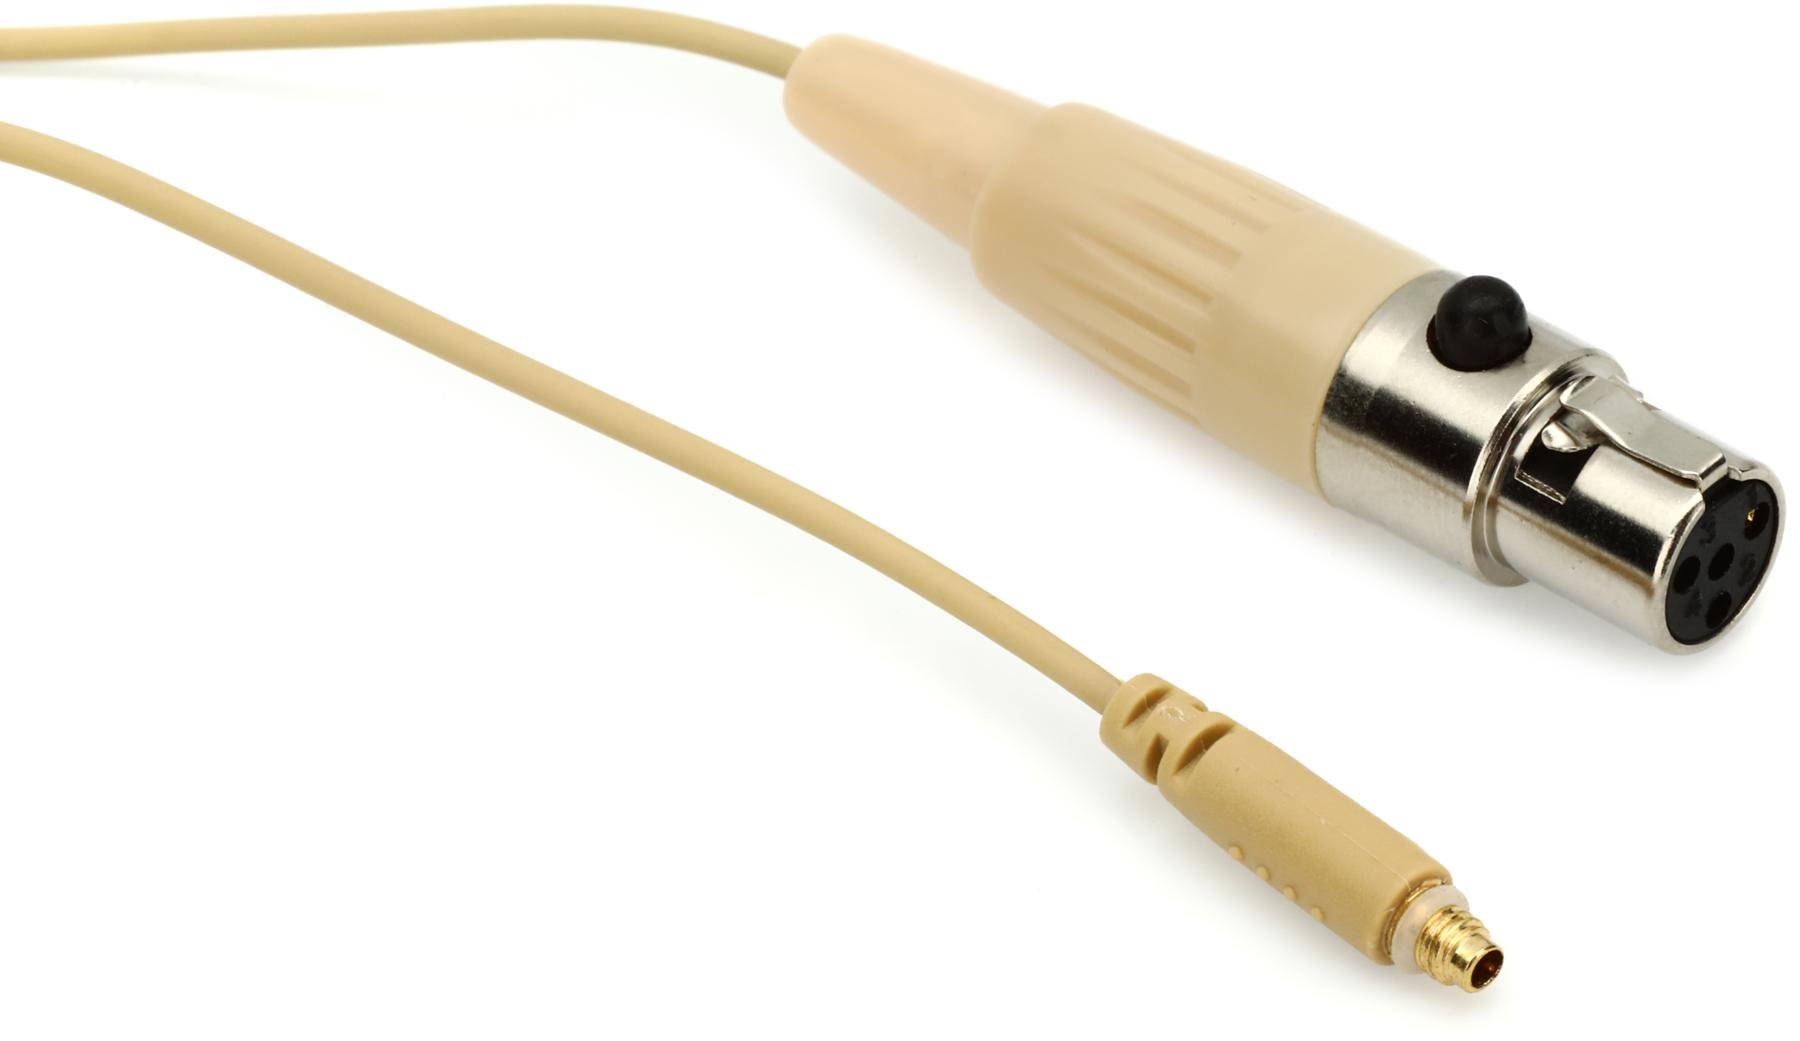 Galaxy Audio CBLSHU Headset Replacement Cable with TA4F Connector for Shure  Wireless - Beige